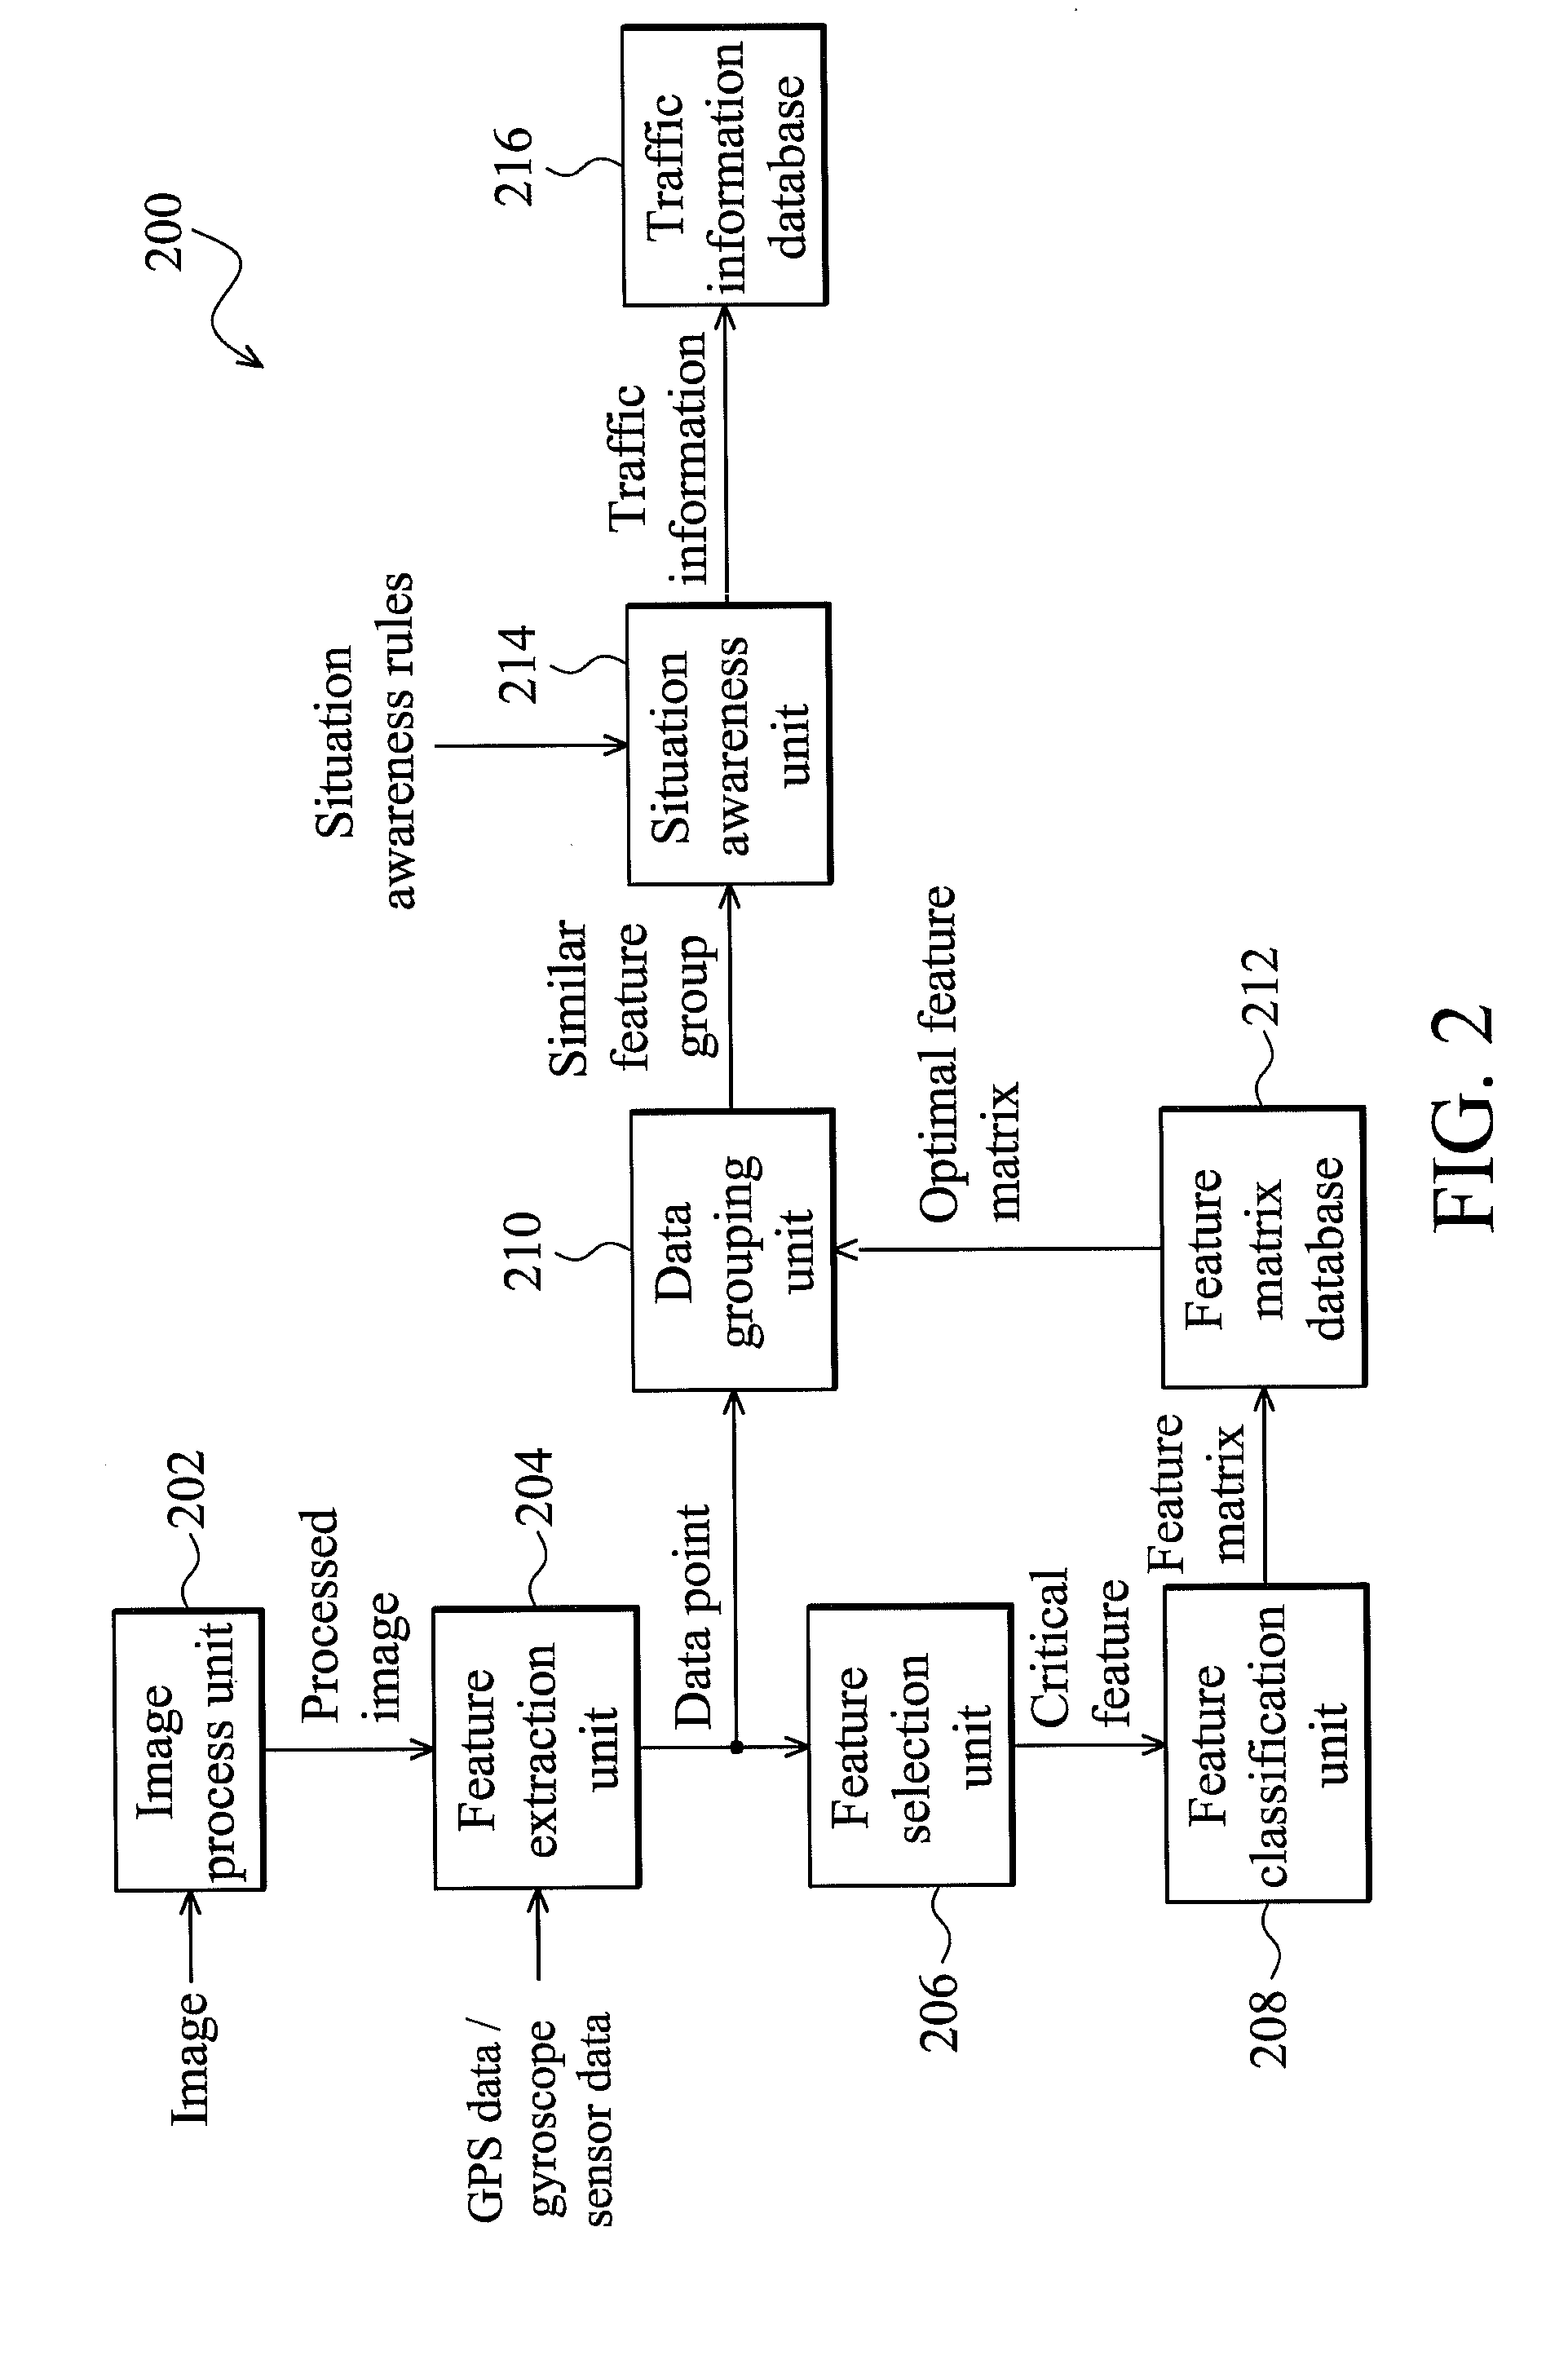 Real-time traffic situation awareness system and method thereof